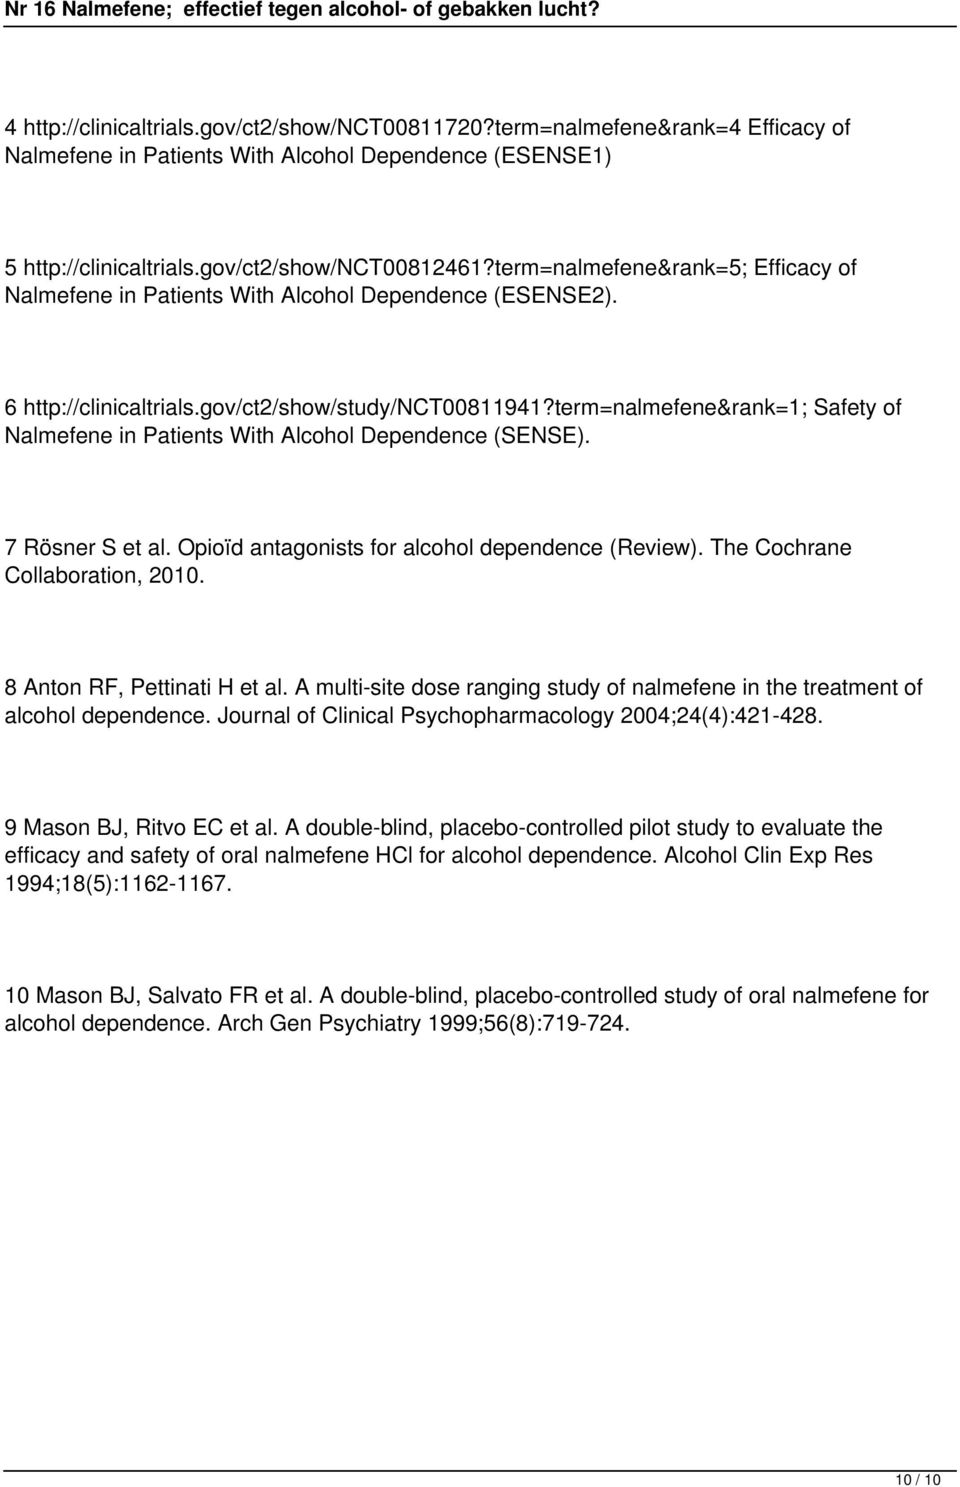 term=nalmefene&rank=1; Safety of Nalmefene in Patients With Alcohol Dependence (SENSE). 7 Rösner S et al. Opioïd antagonists for alcohol dependence (Review). The Cochrane Collaboration, 2010.